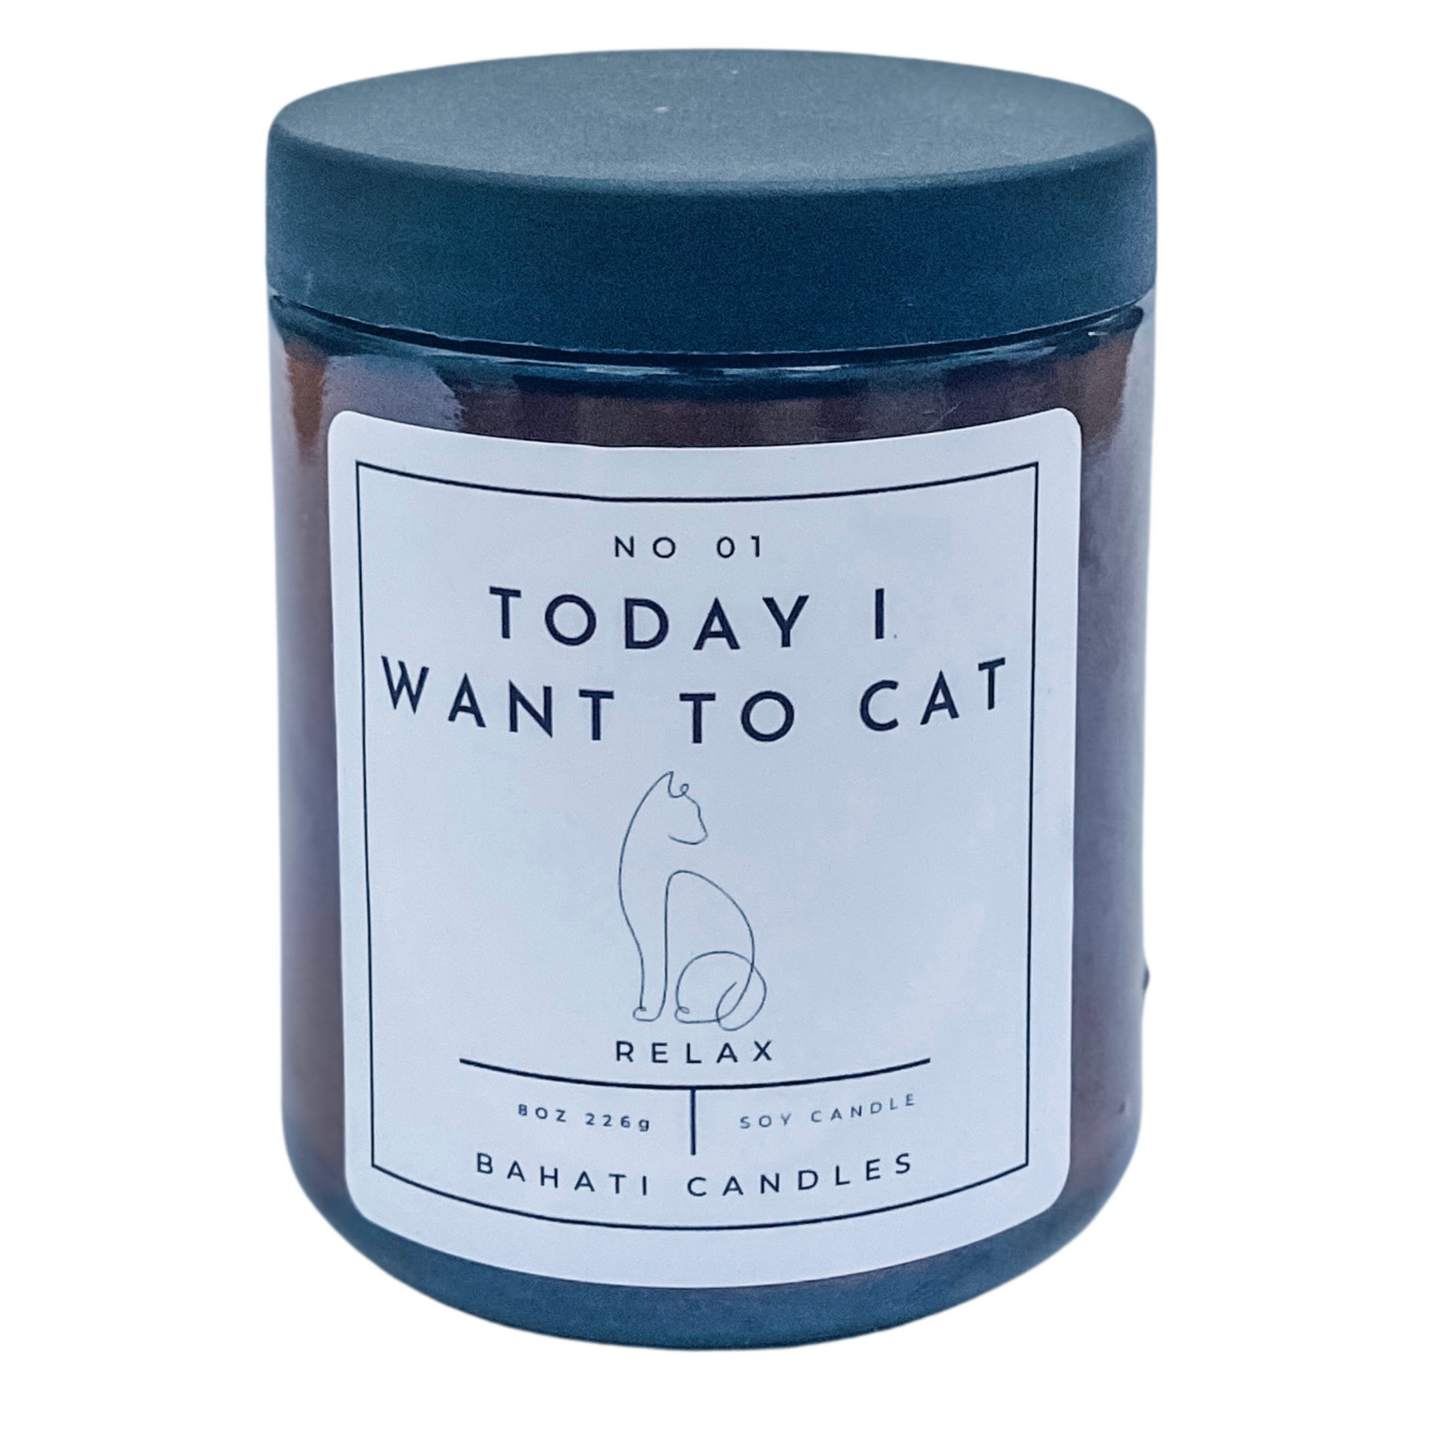 Today I want to cat - 8 ounce candle